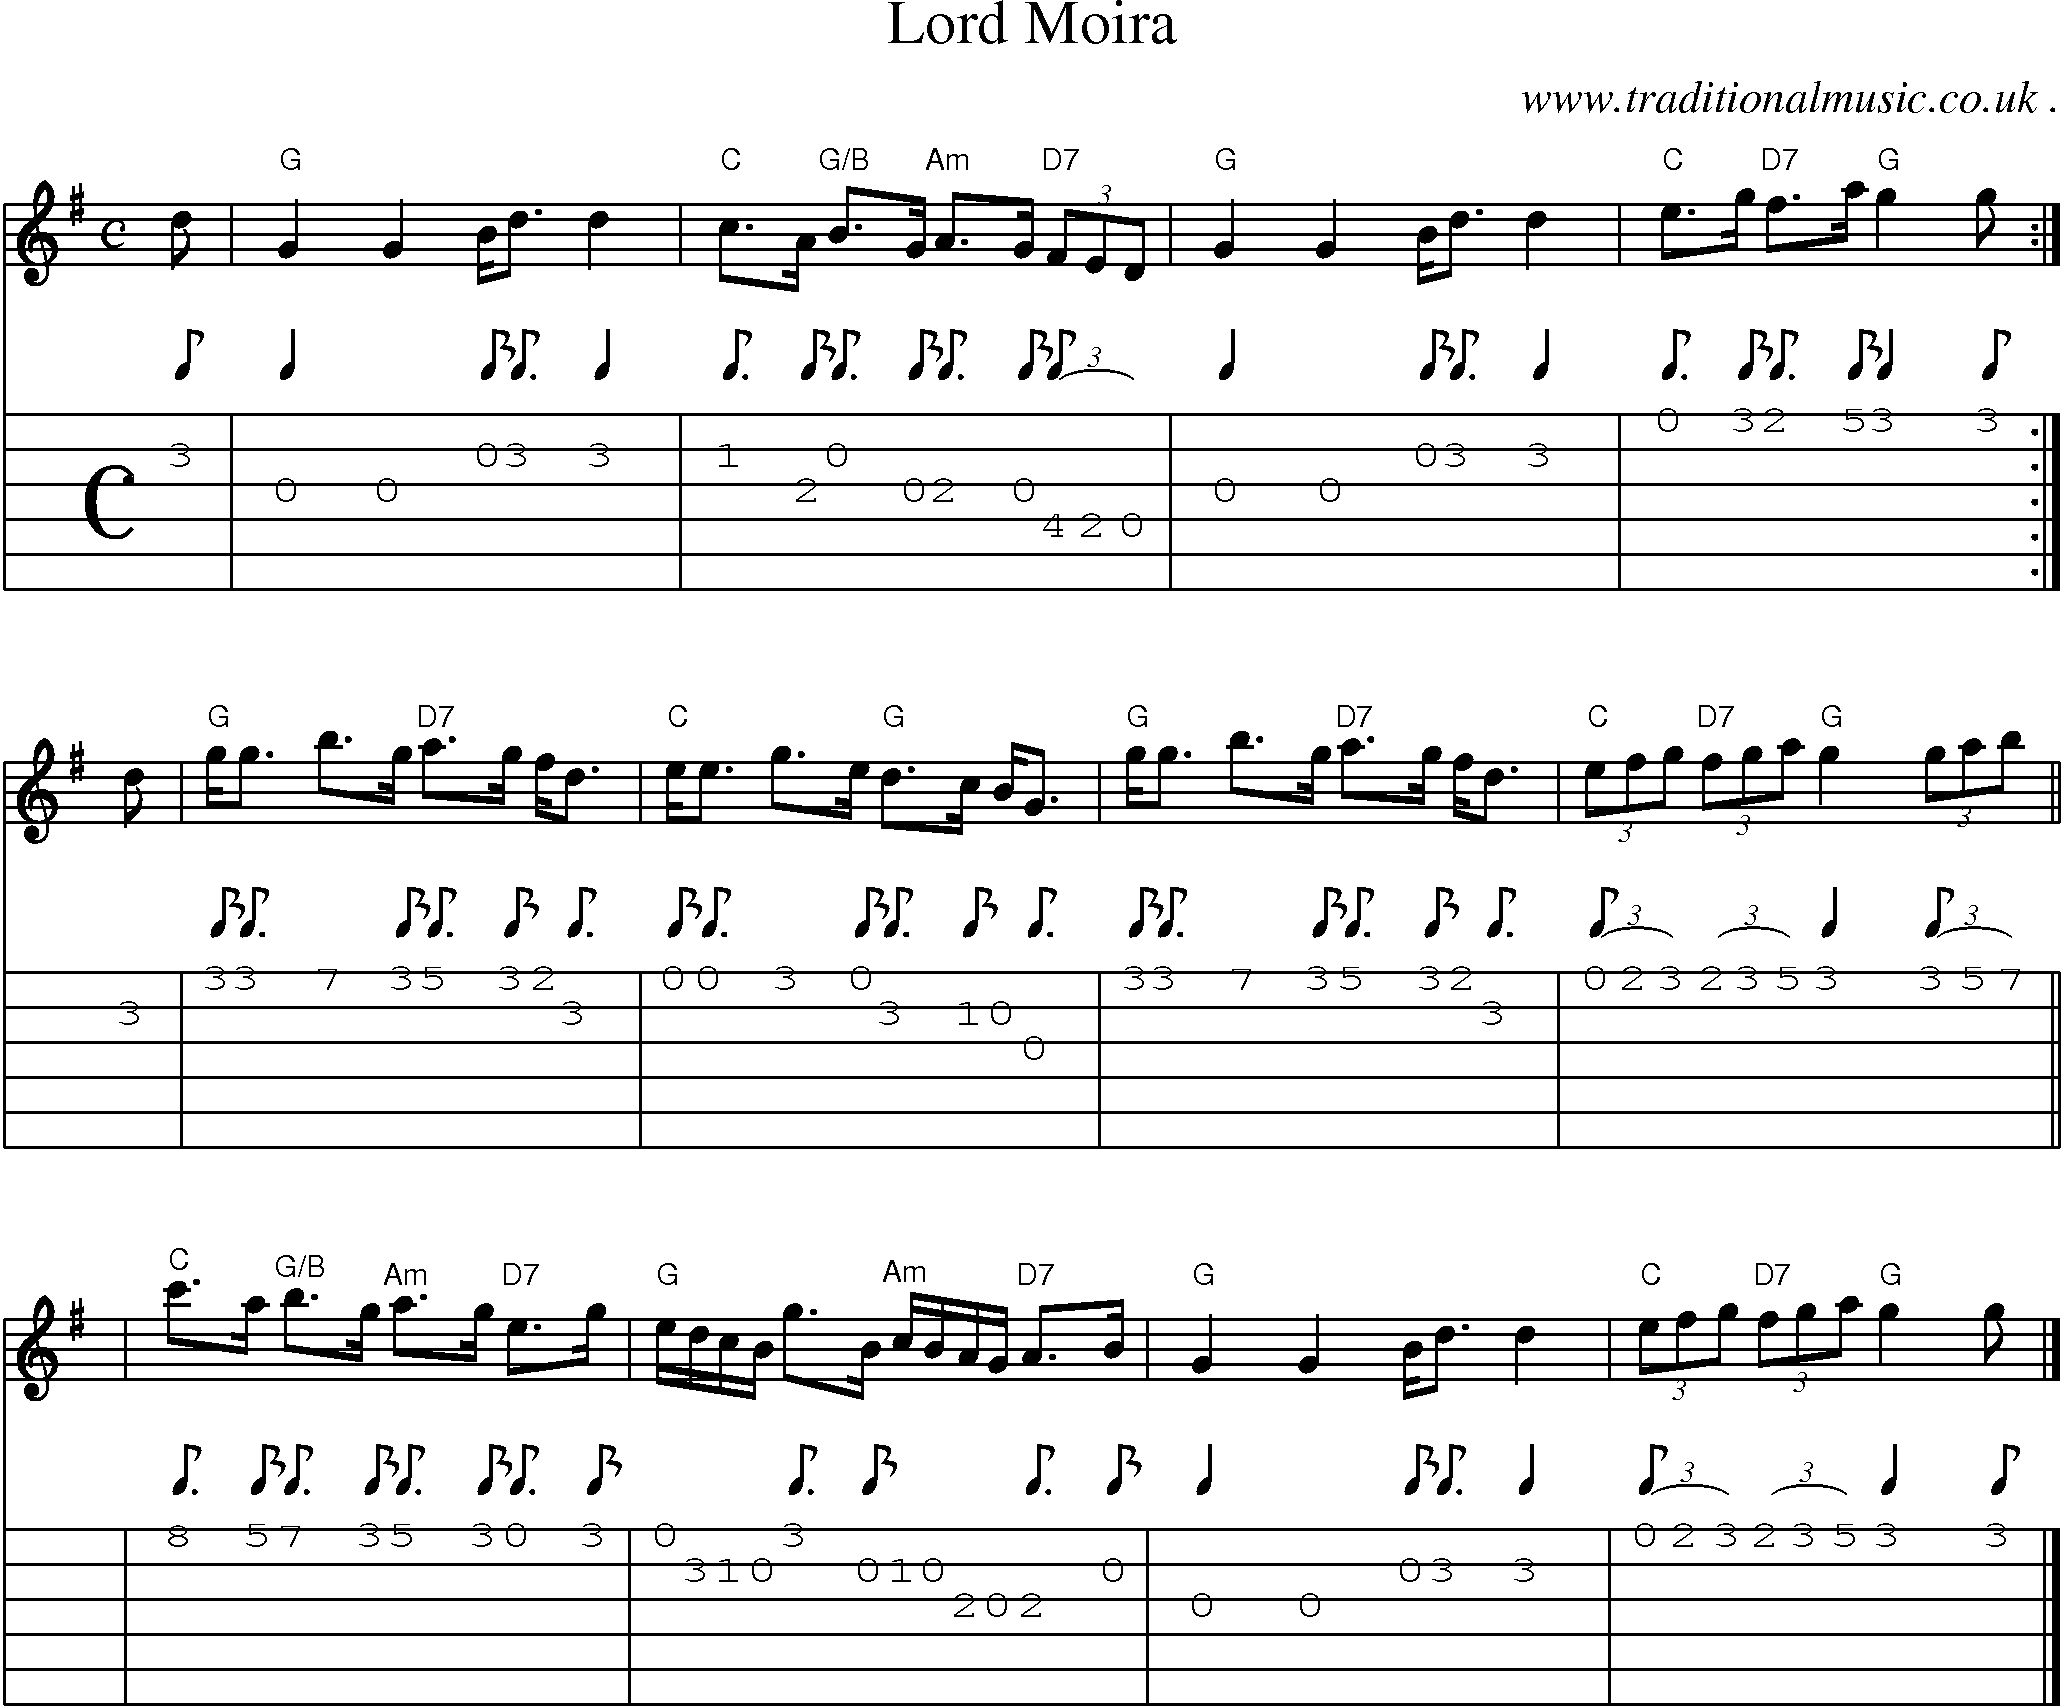 Sheet-music  score, Chords and Guitar Tabs for Lord Moira